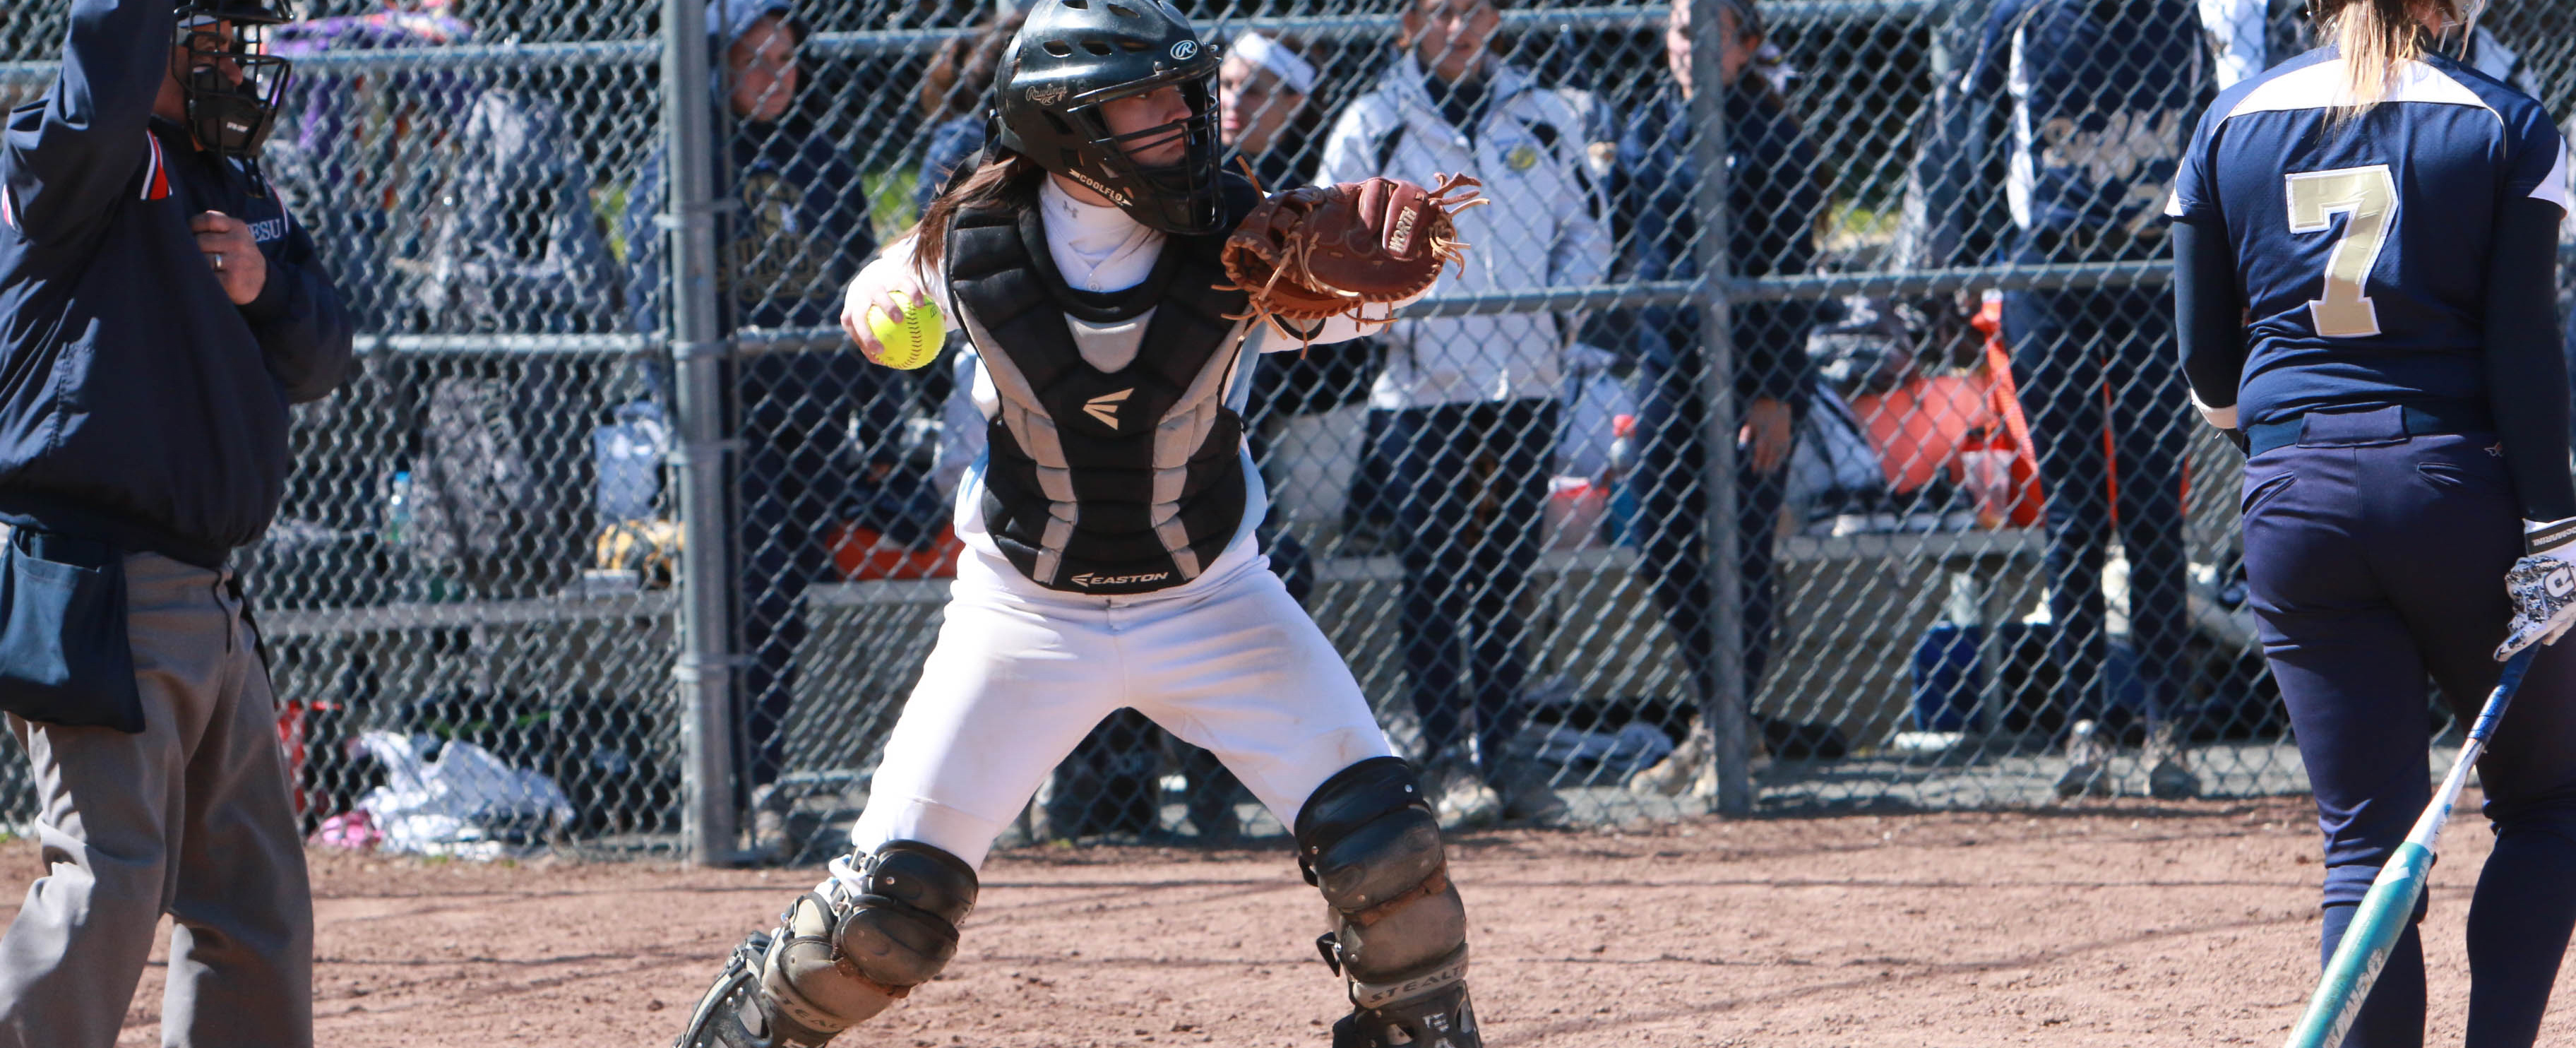 Gordon Sweeps Softball in Non-Conference Test